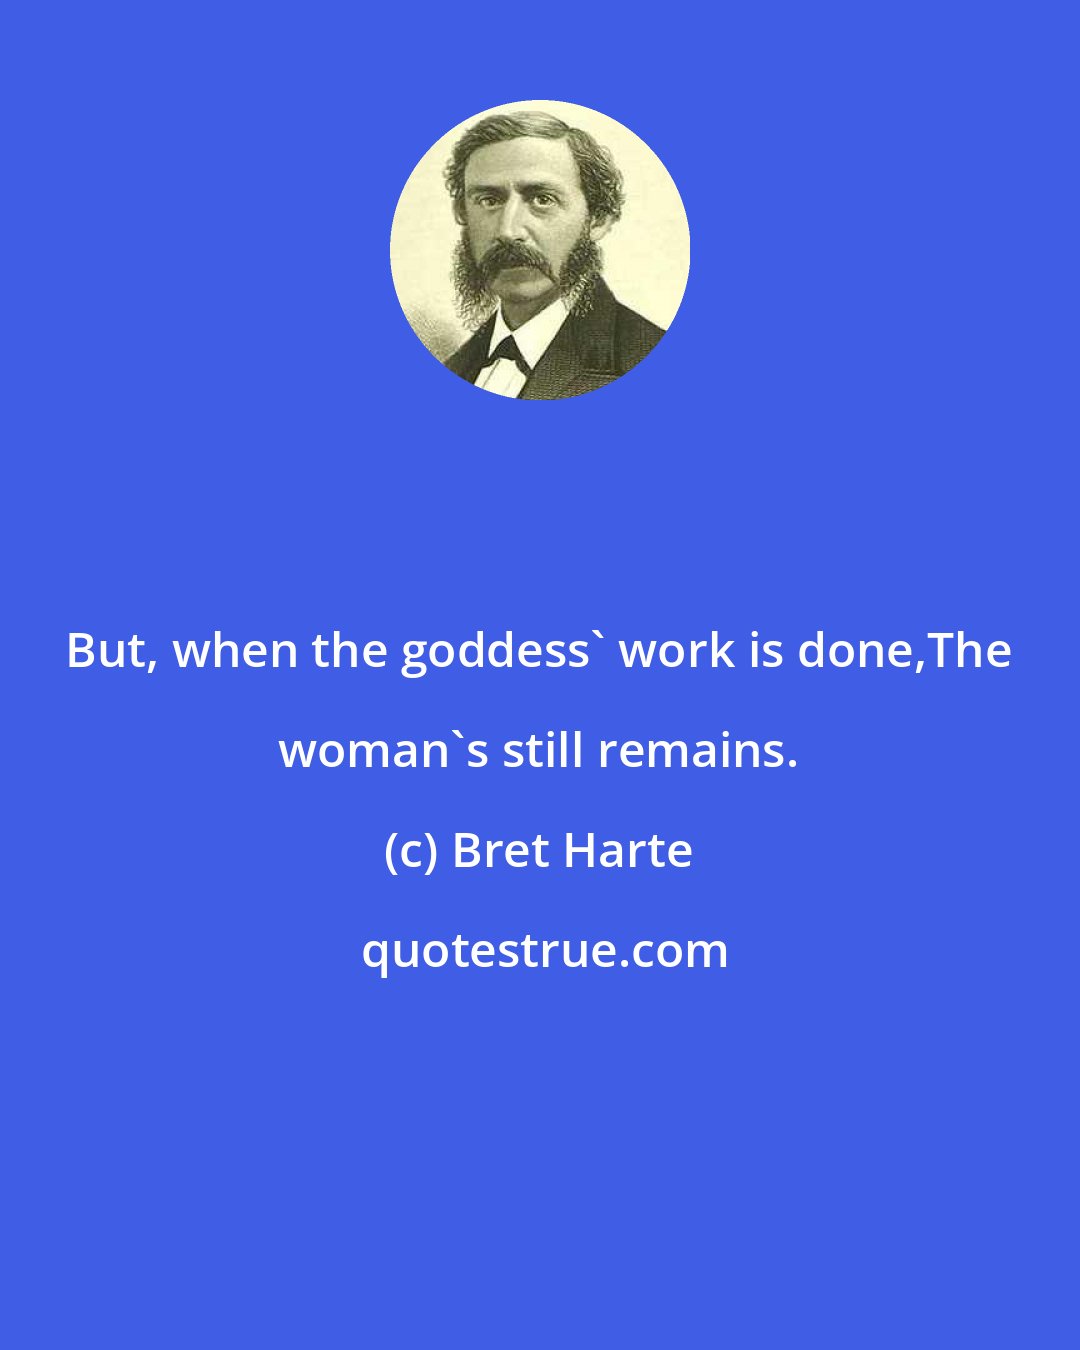 Bret Harte: But, when the goddess' work is done,The woman's still remains.